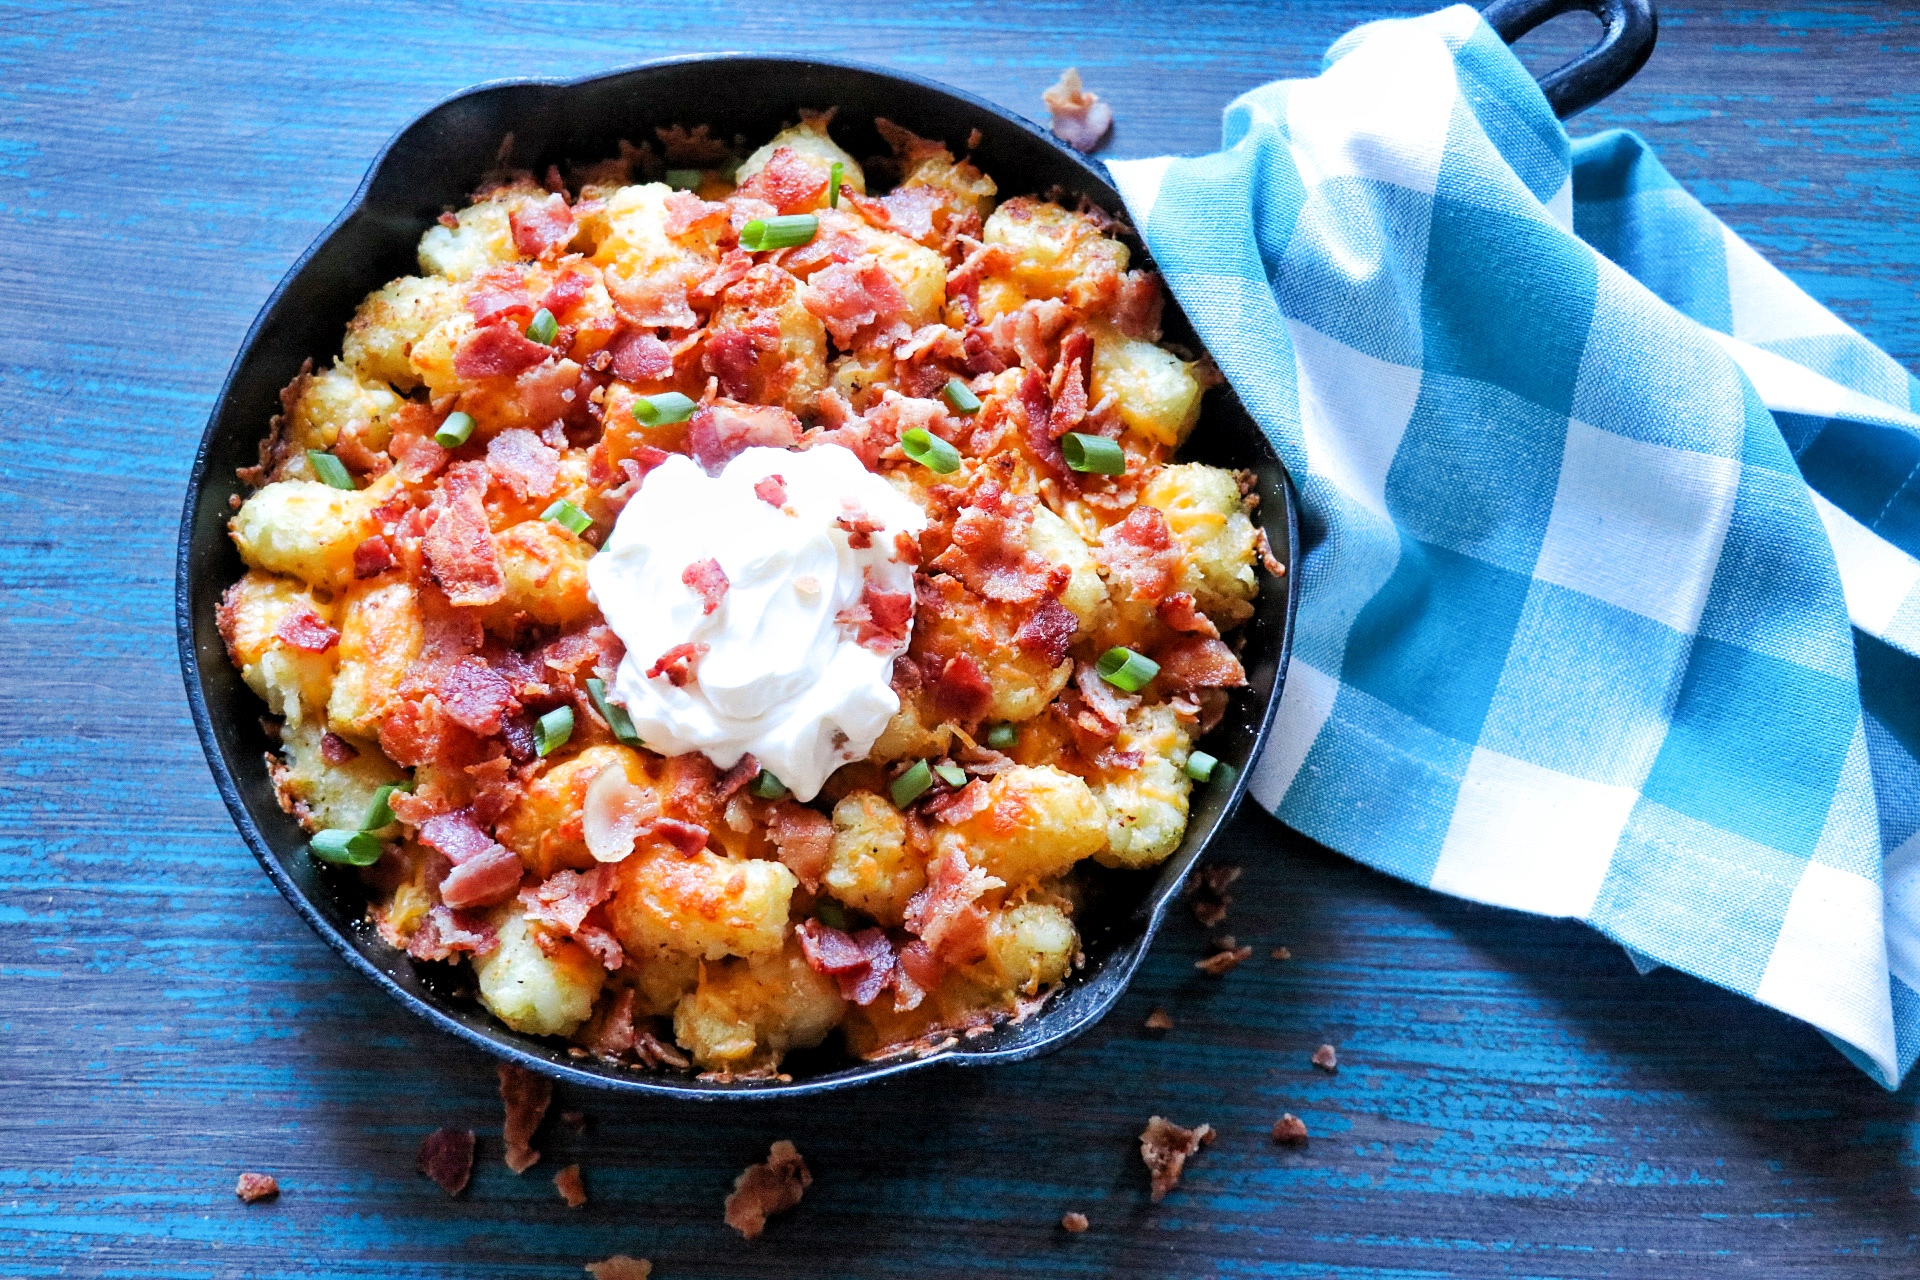 Totchos and other Loaded Tots Recipes - Cheesy Bacon Tater Tots